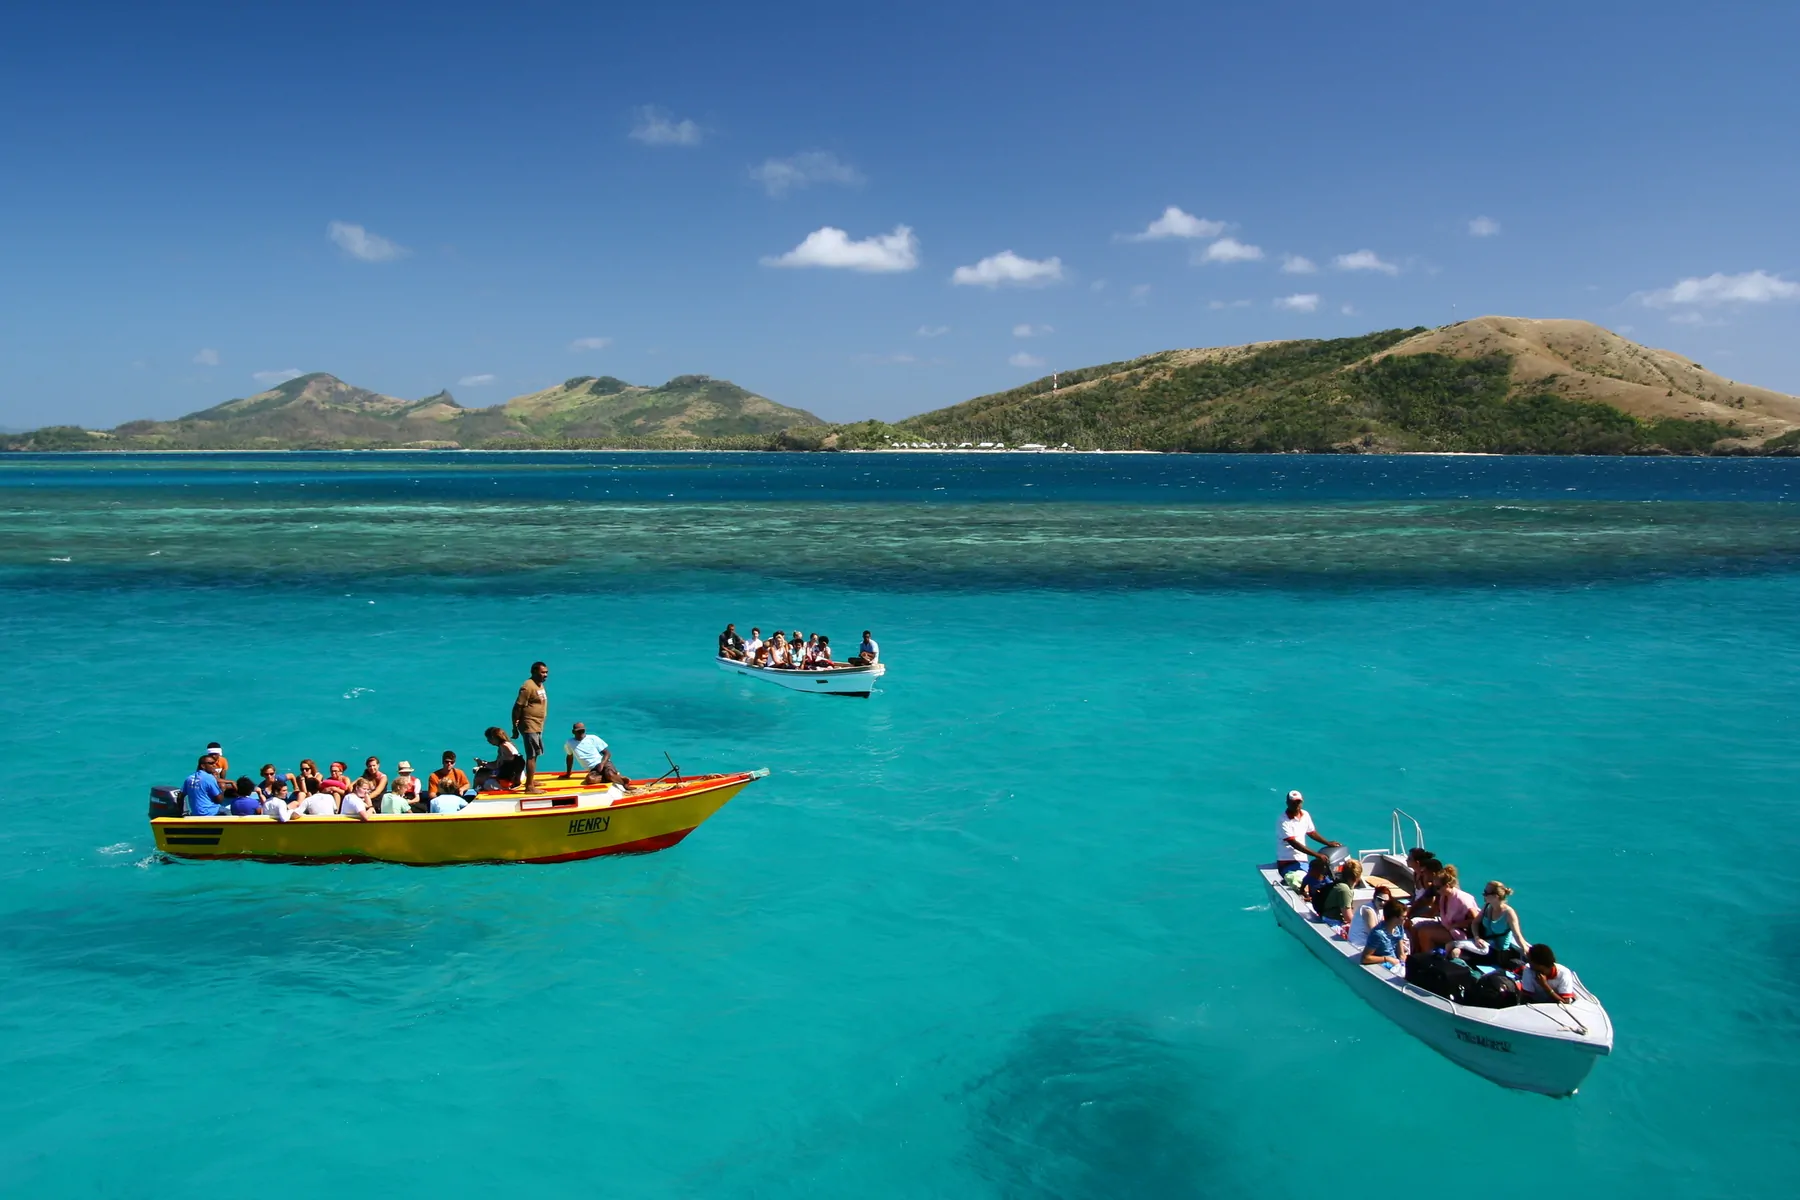 Fiji boat hover on turquiose water